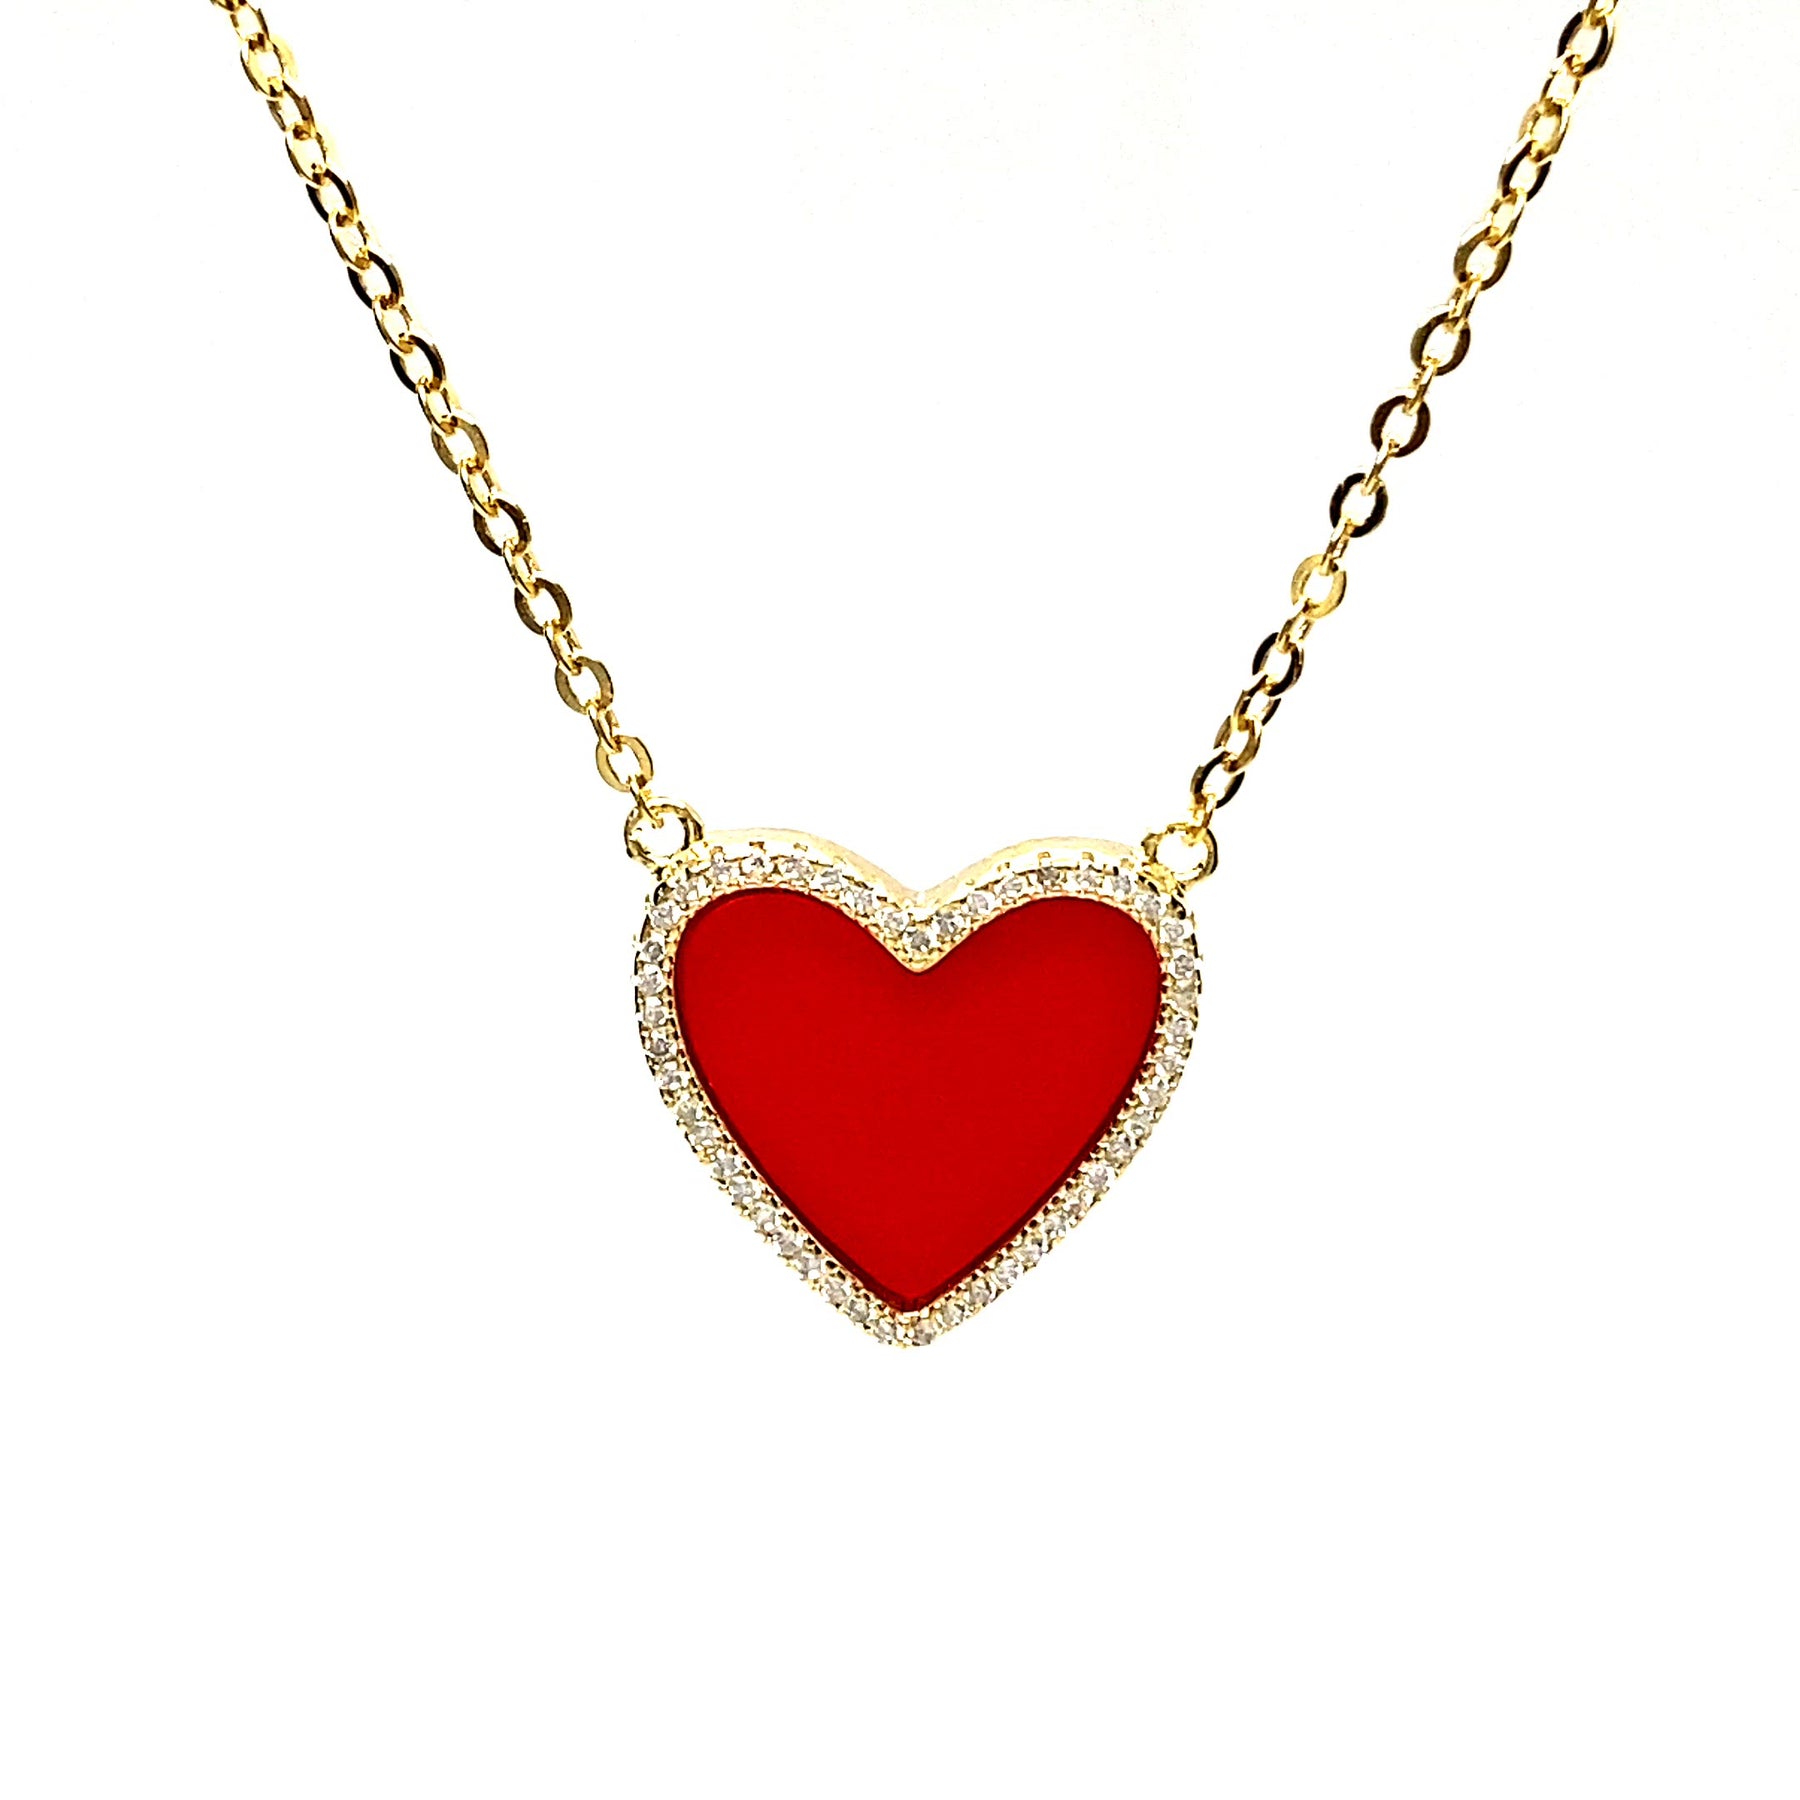 Romantic Heart Womens Pendant Necklace Red From Ruiqi08, $19.75 | DHgate.Com